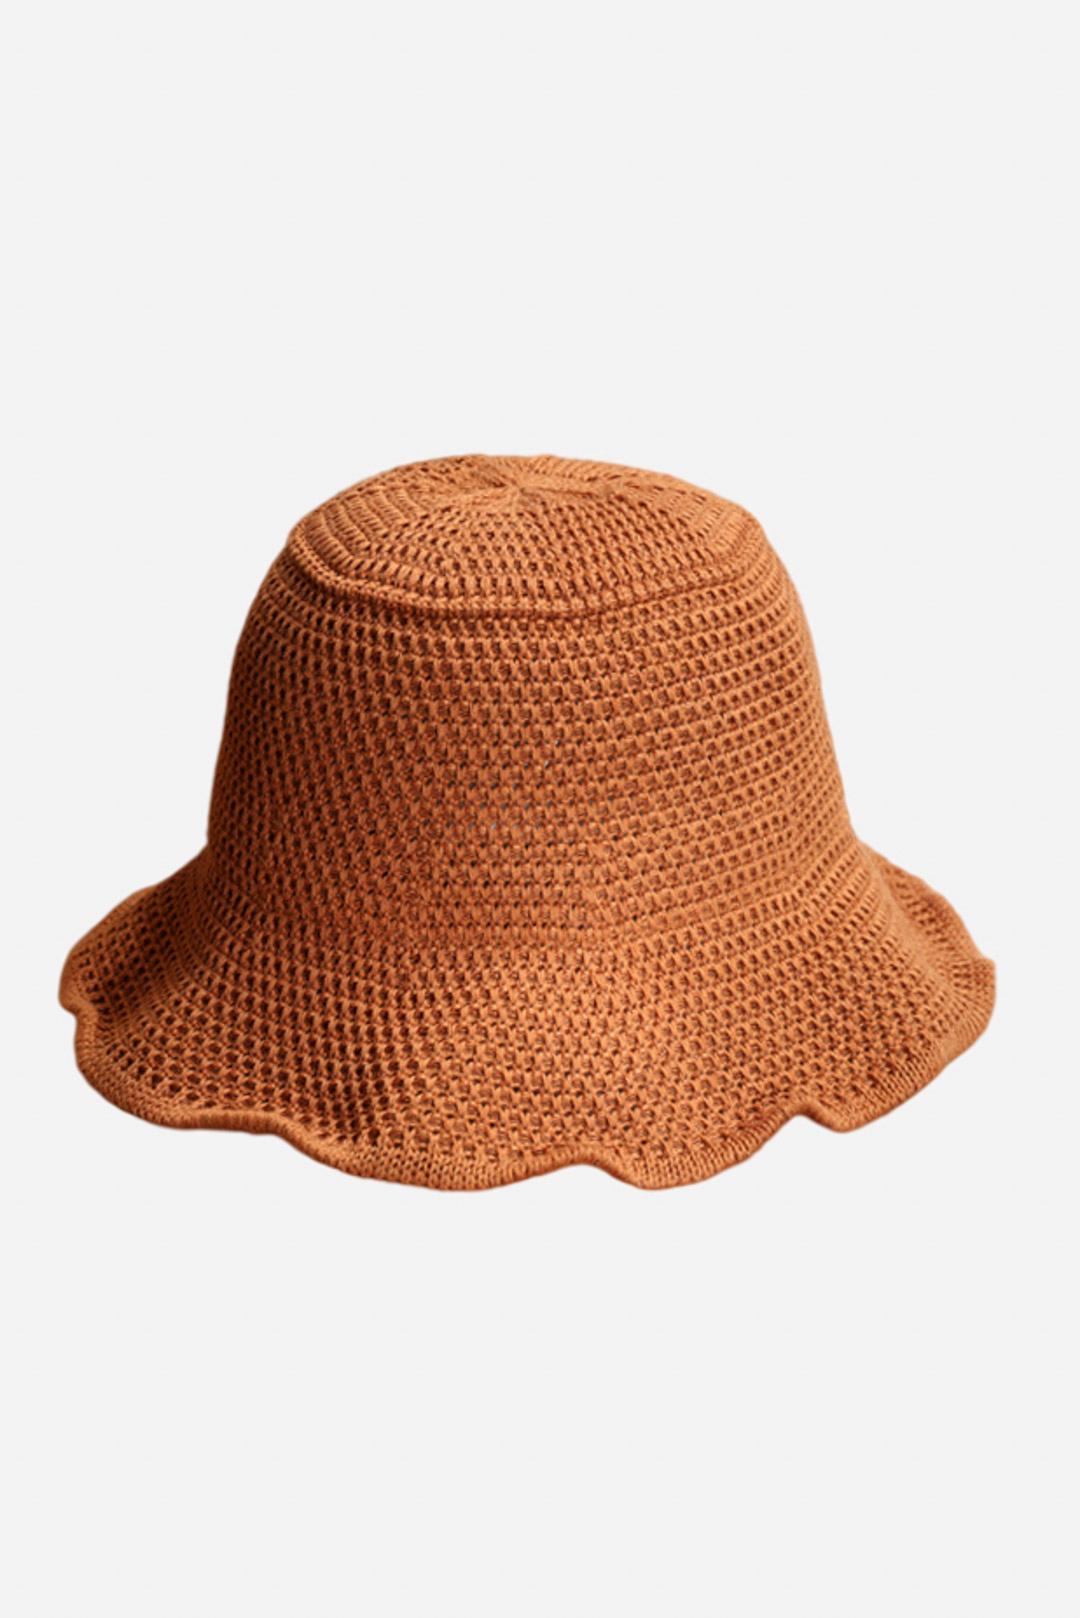 Solid Color Knitted Sun-proof Hat